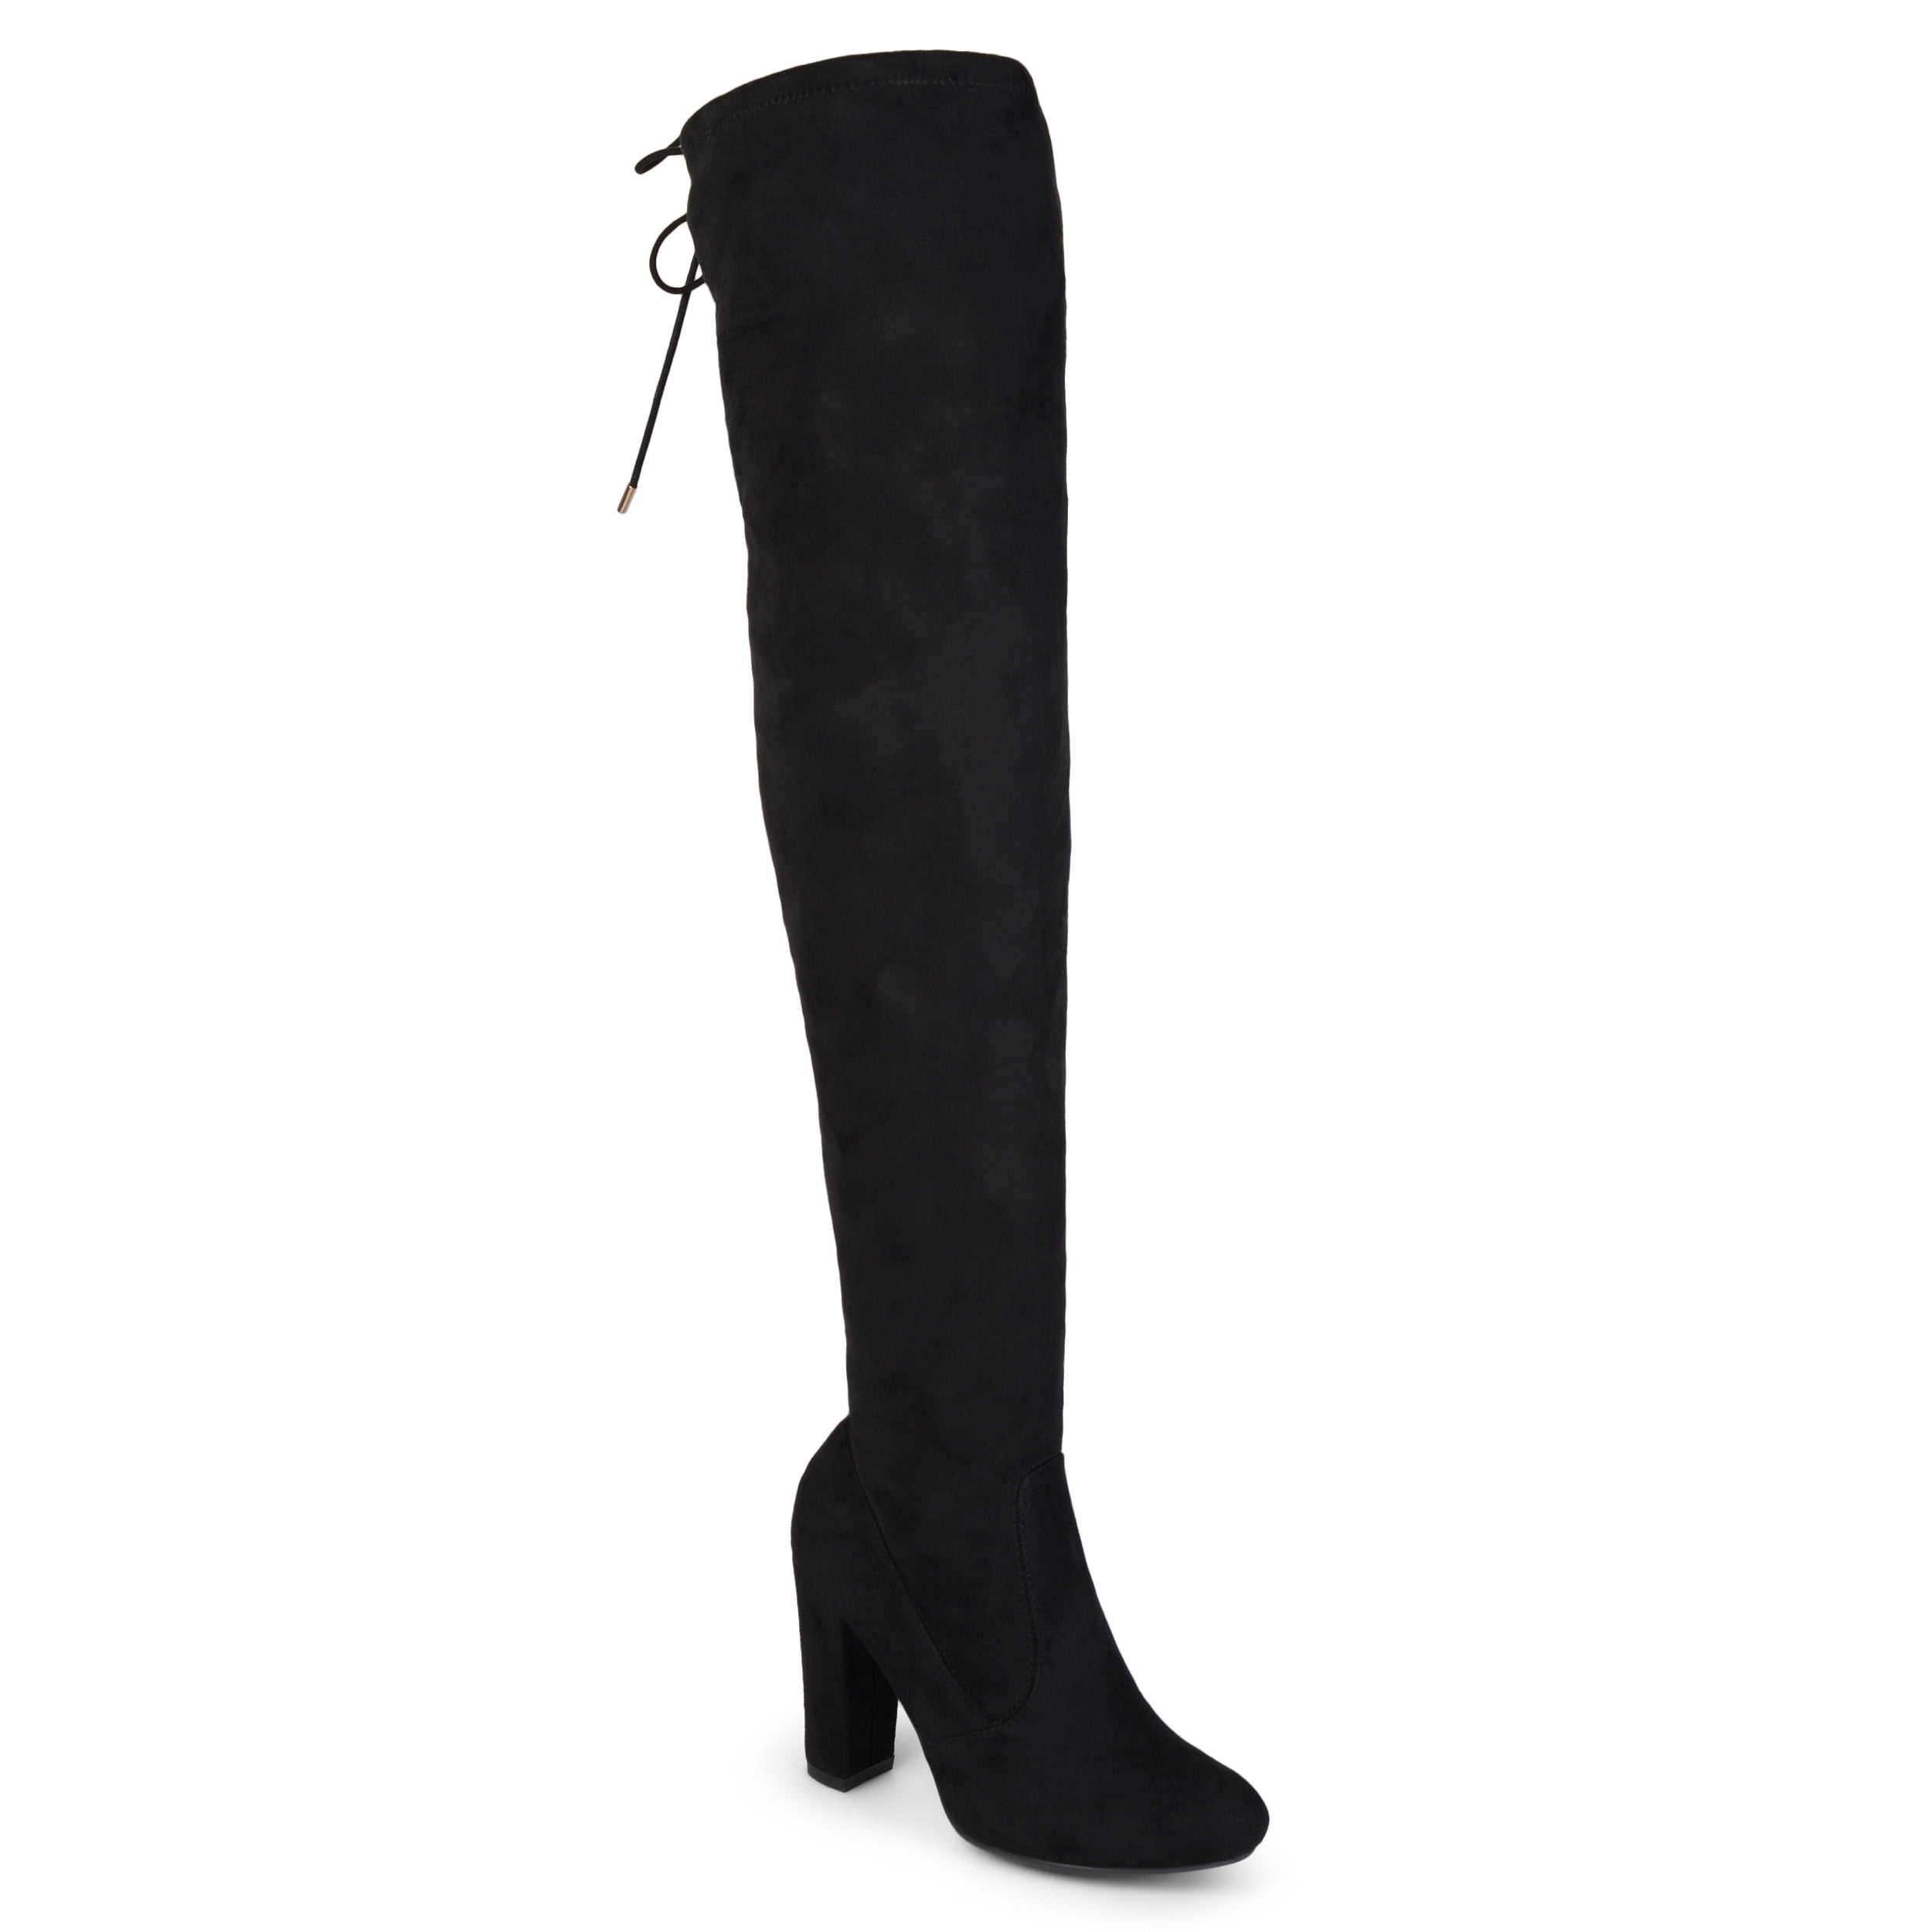 Fashion Thirsty Womens Stretch Panel Mid Calf Knee High Stiletto Mid Heel Boots Size